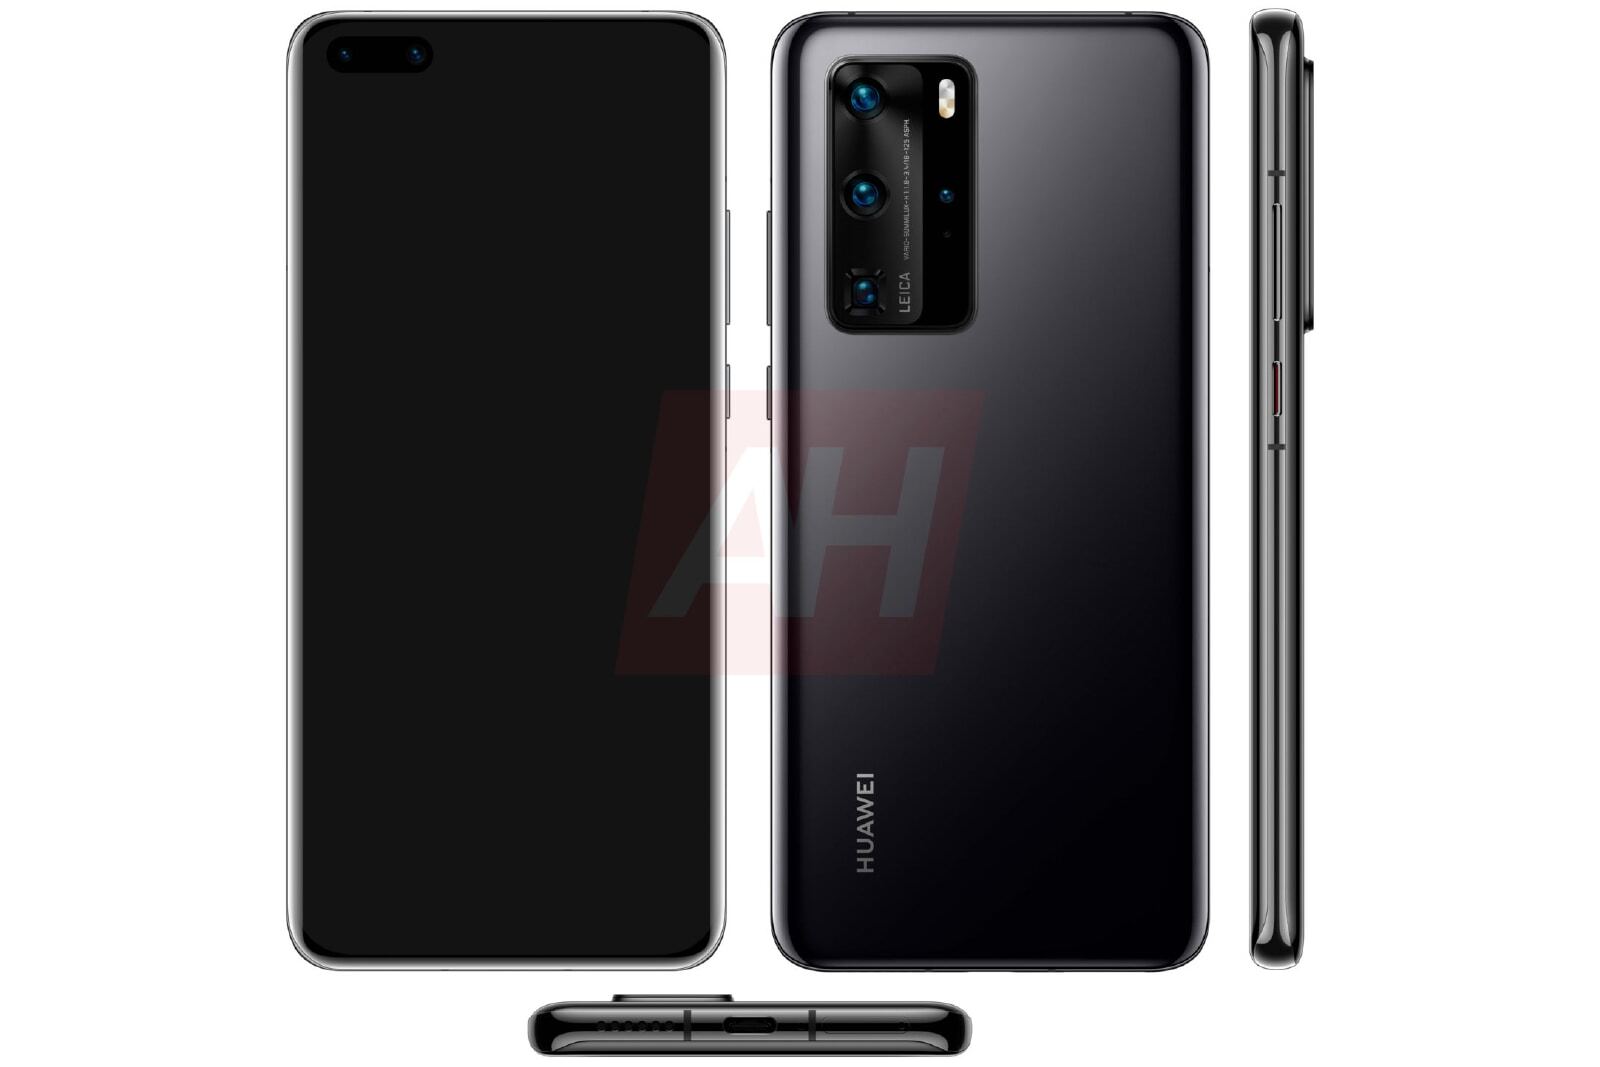  Huawei P40 Pro - Leaked Huawei P40 Pro renders show off design, reveal launch colors